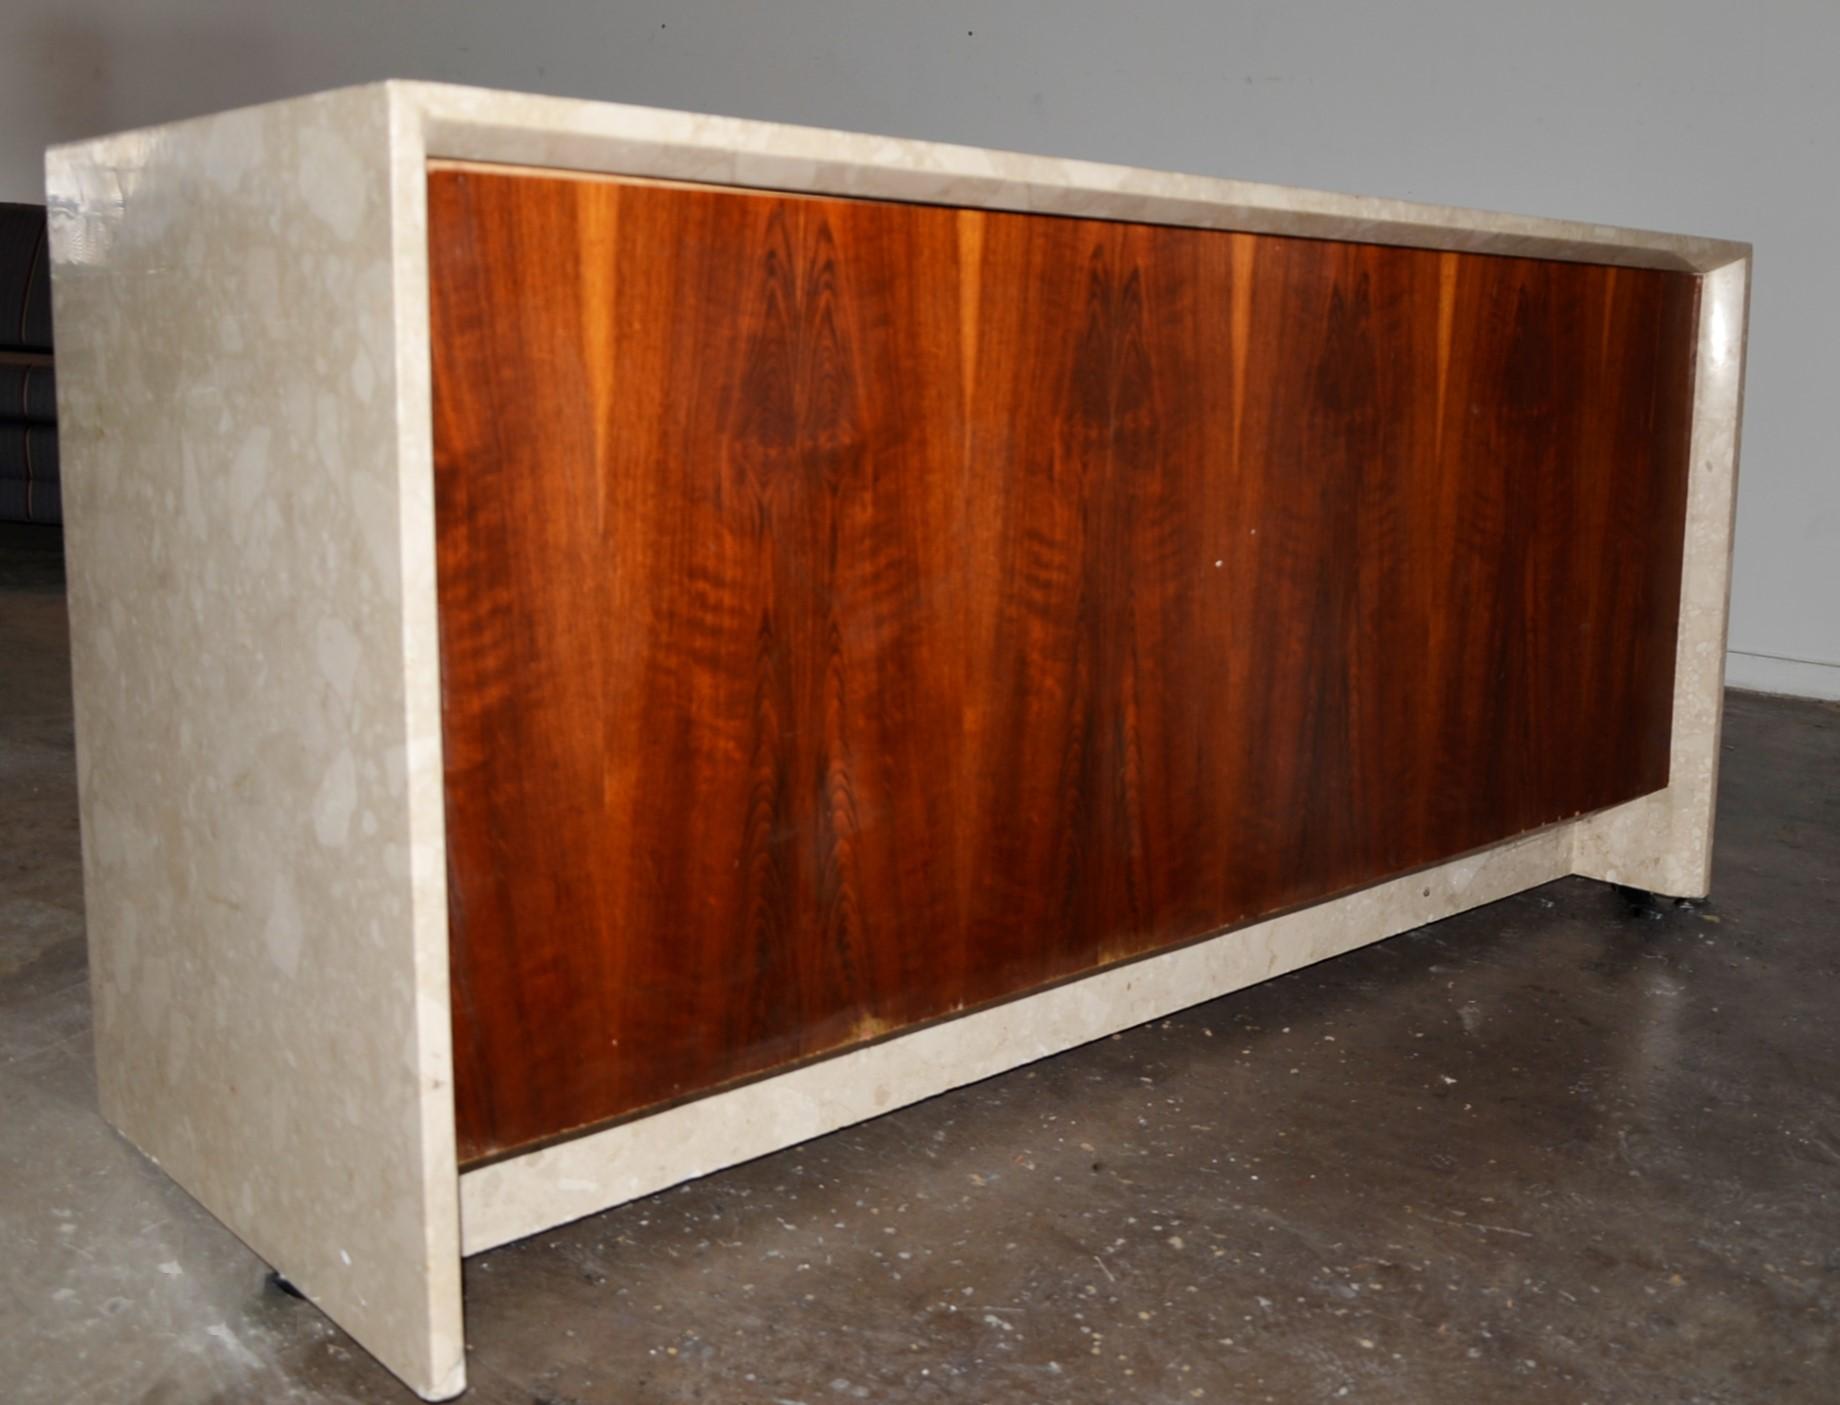 Offered is a Mid-Century Modern gracious polished tan and creamy white. travertine marble cantilevered sideboard with an inset (what is thought to be) brown rosewood cabinet that is finished on all four sides. Perfect for any 